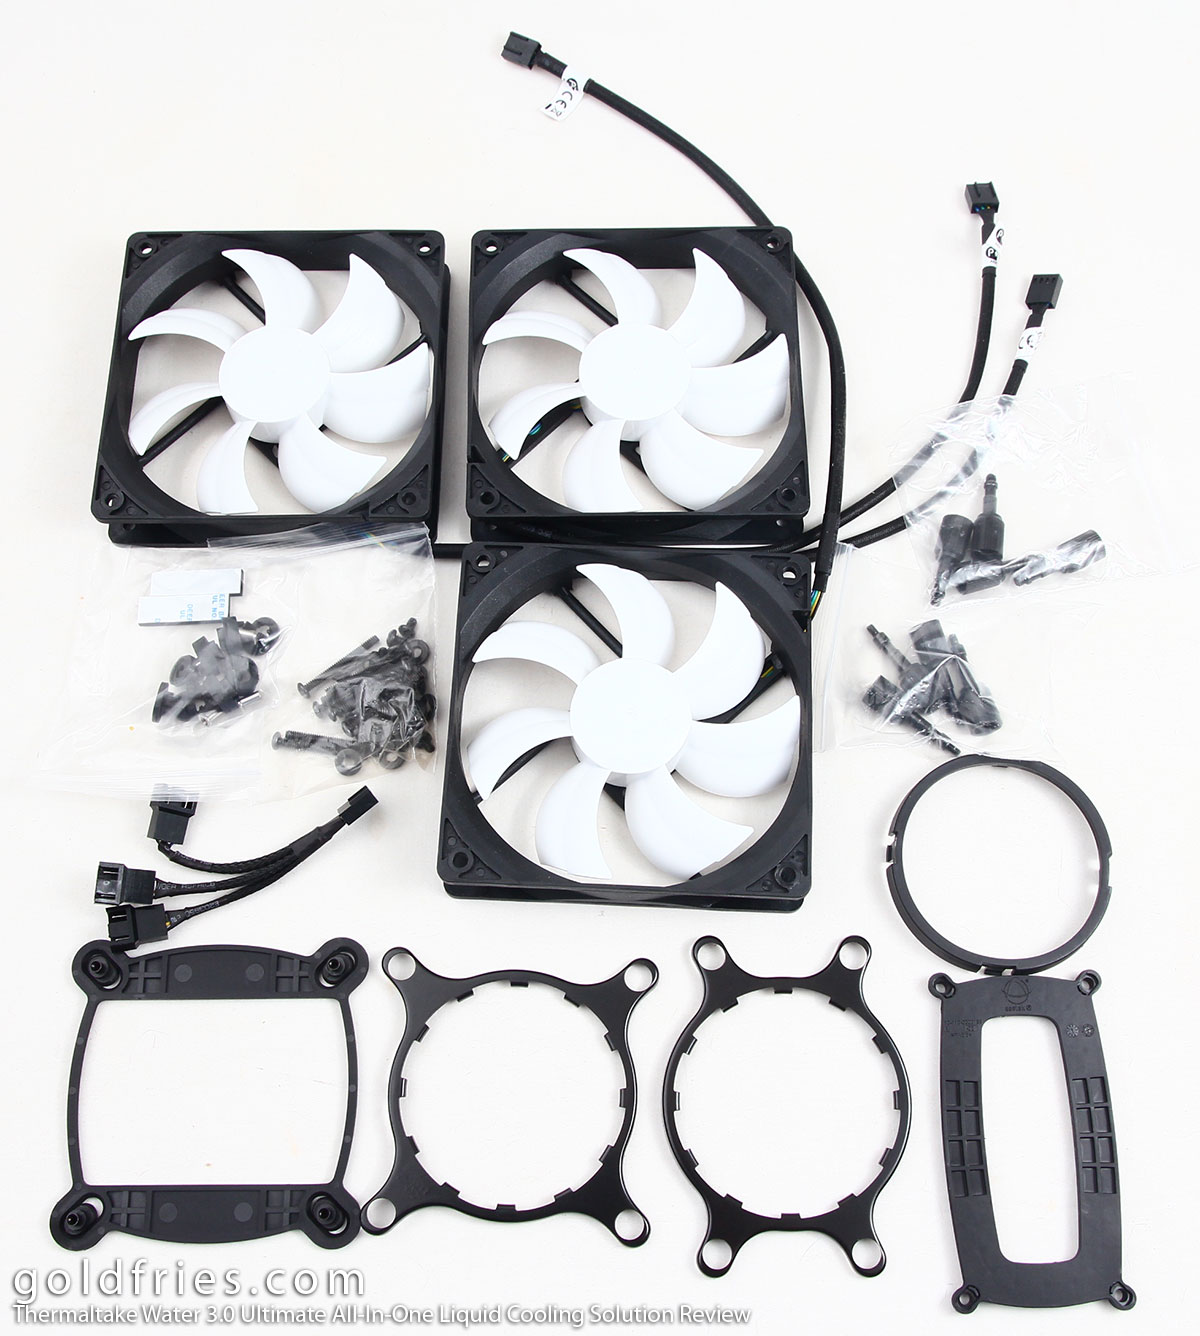 Thermaltake Water 3.0 Ultimate C All-In-One Liquid Cooling Solution Review